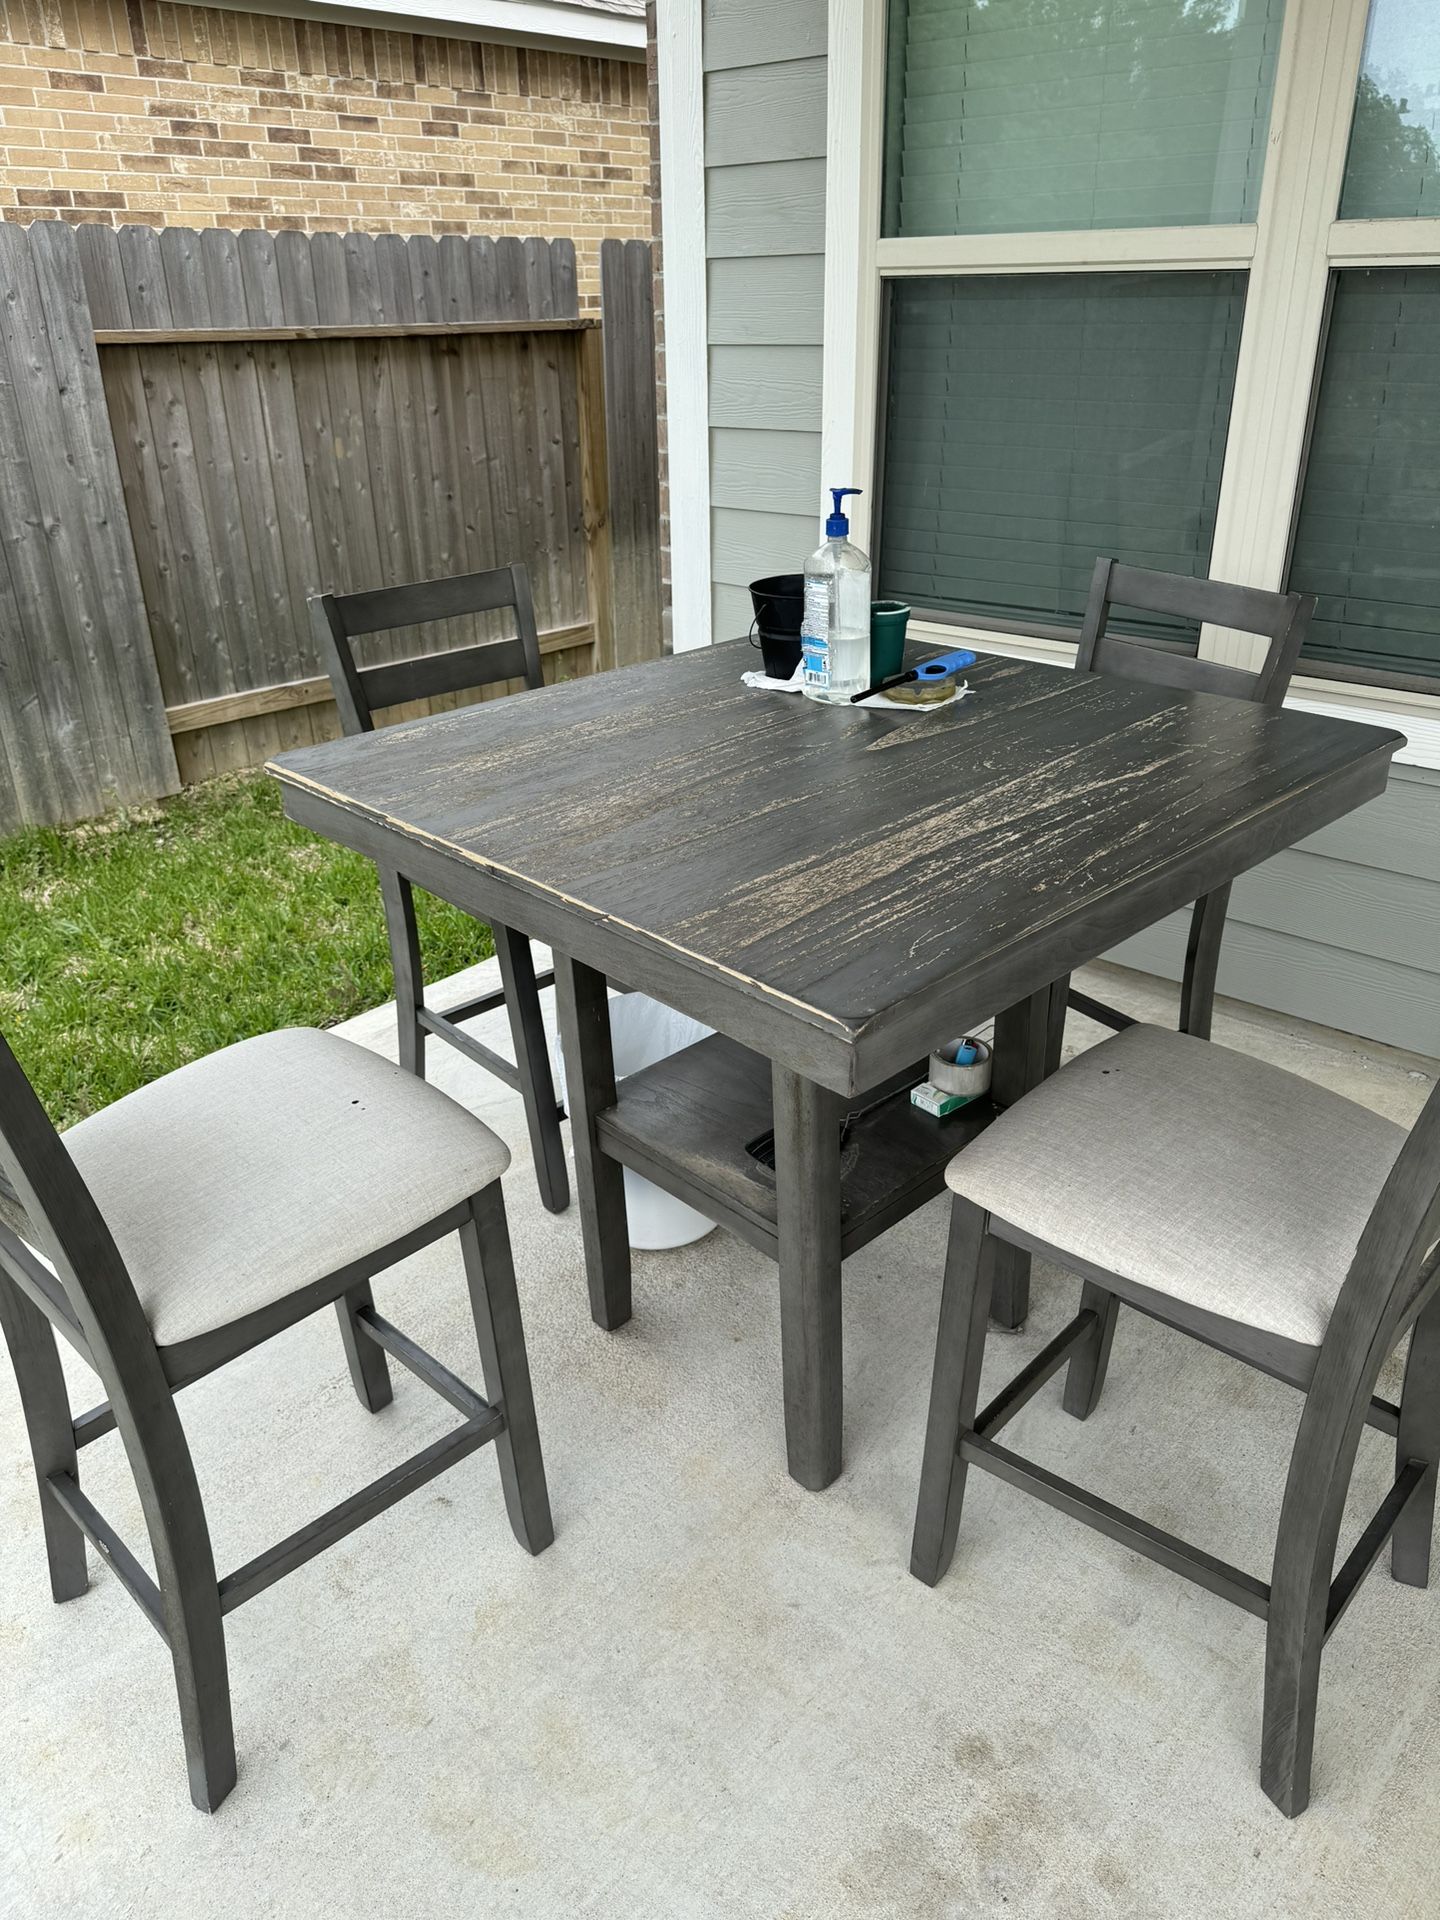 Outdoor Patio Table w/ 4 Chairs 